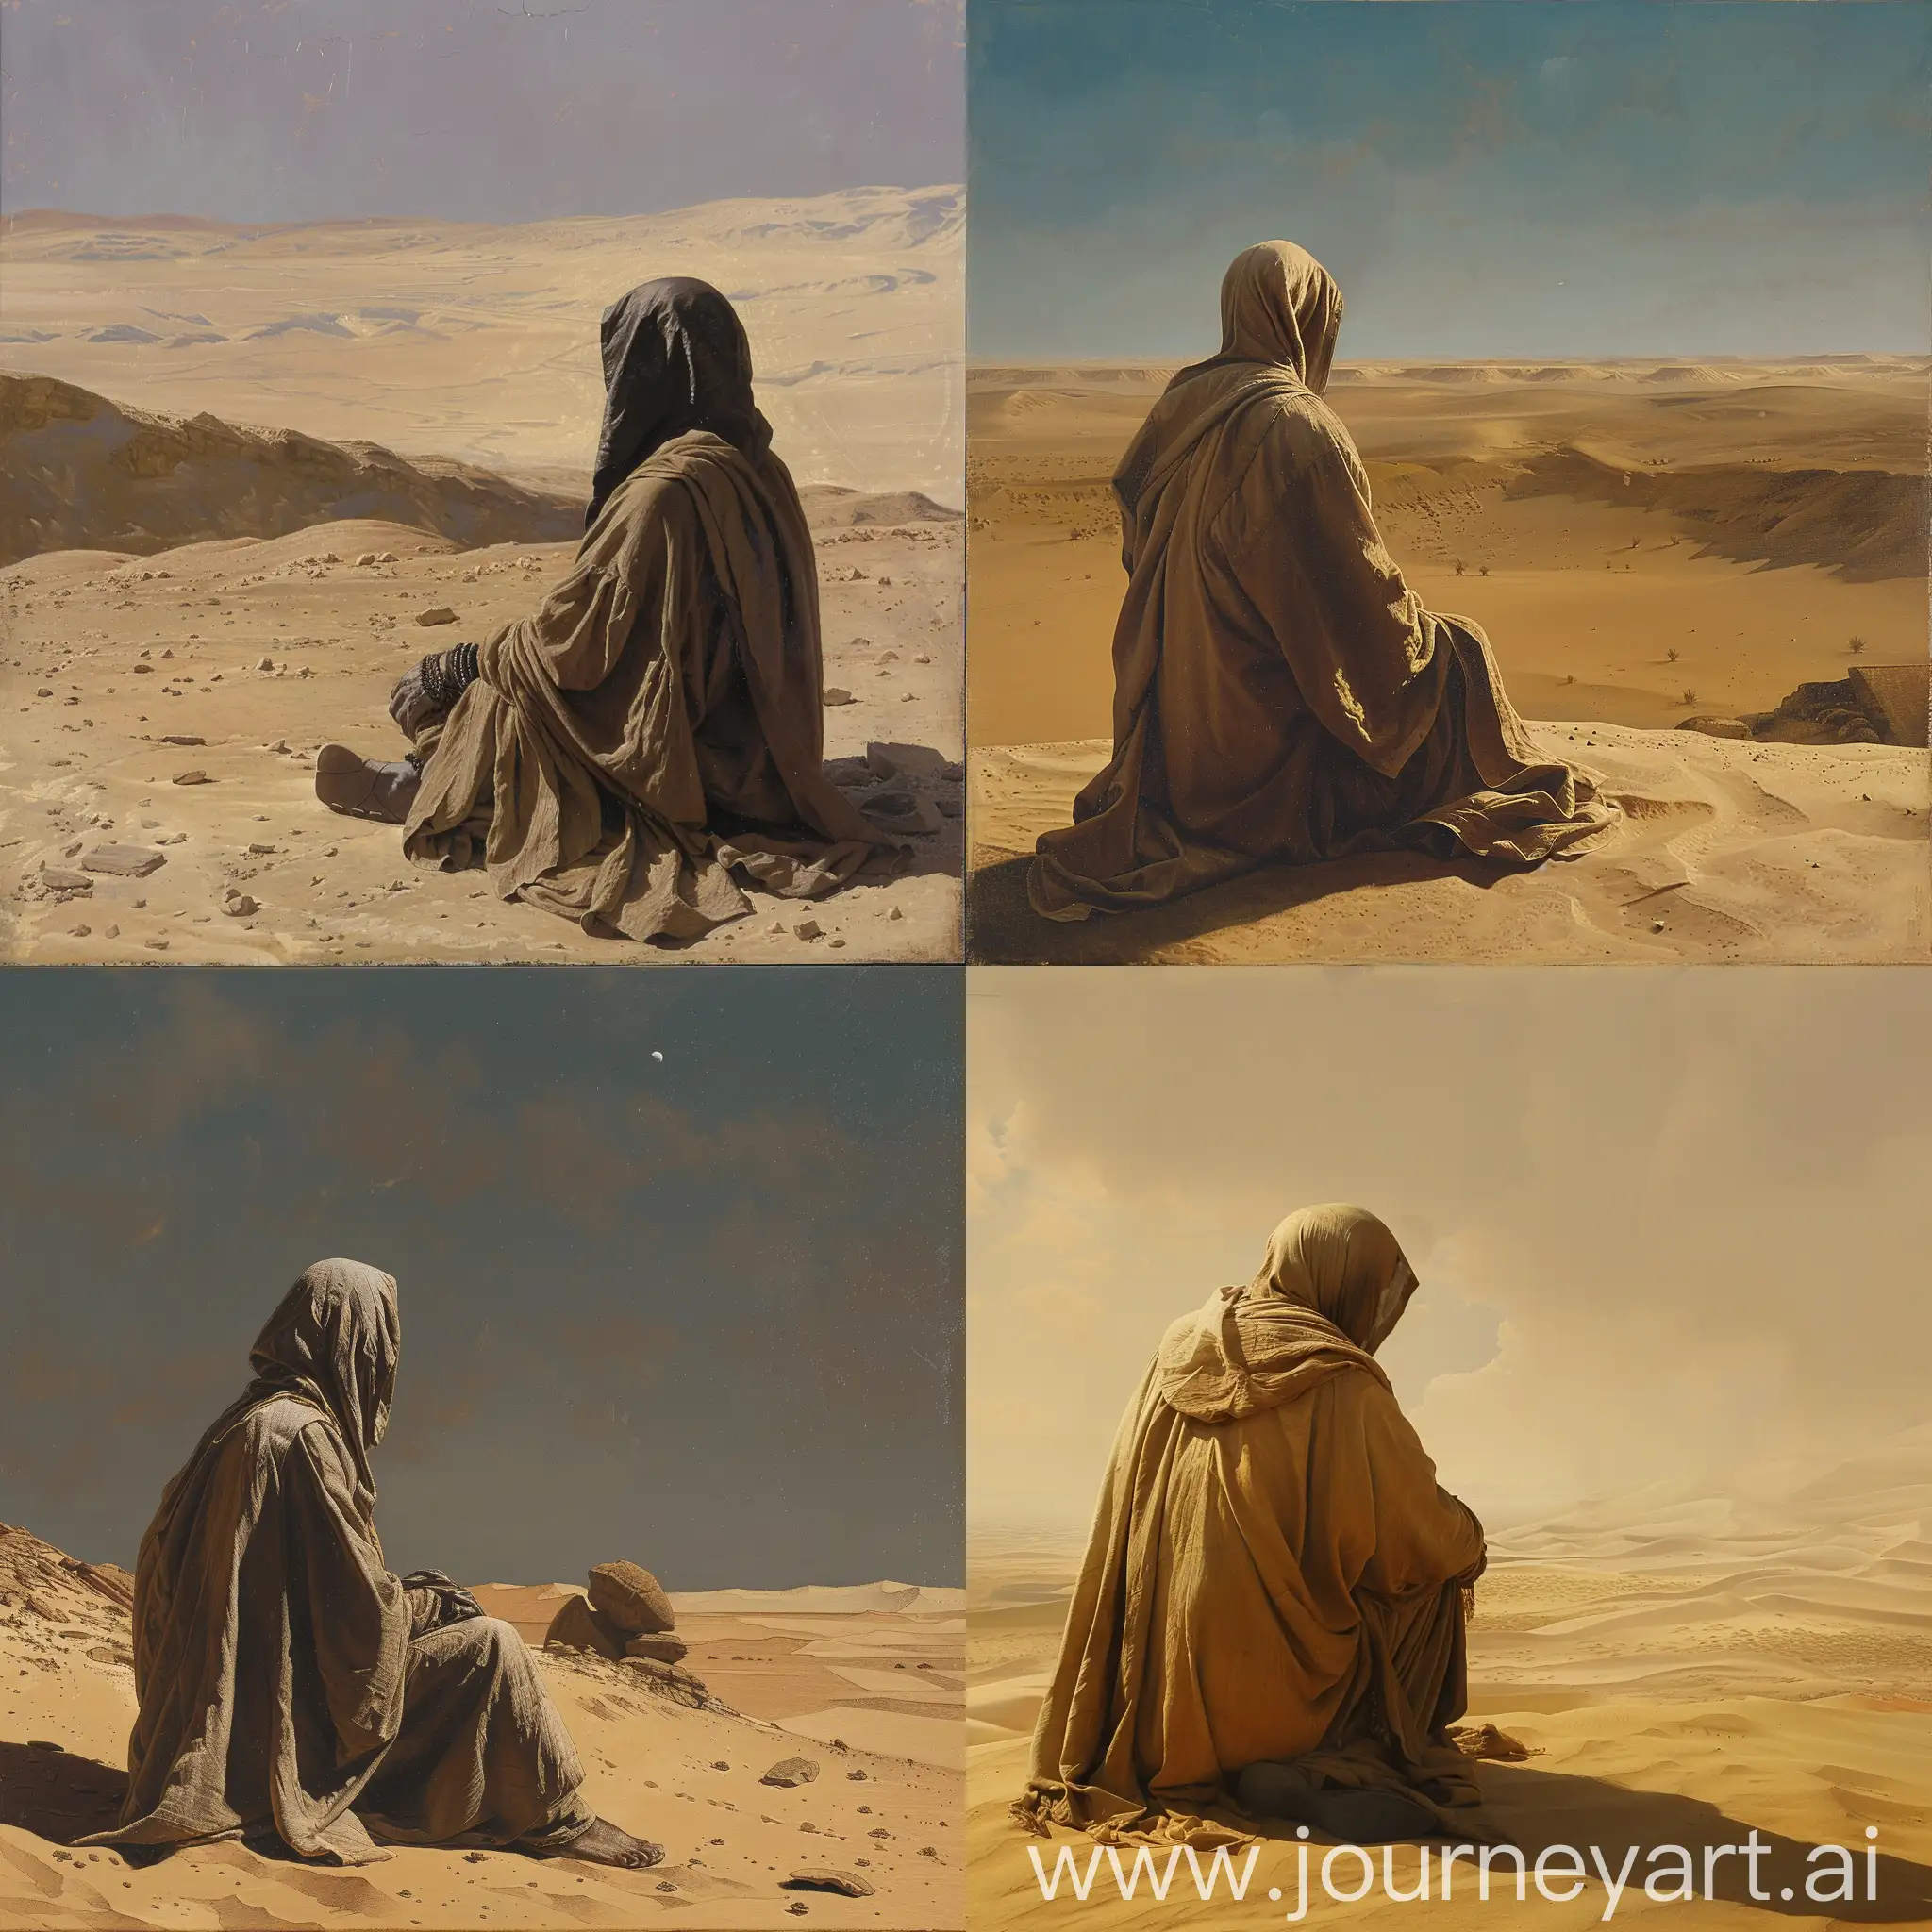 A man in robes waiting for something to happen, whilst in the dessert